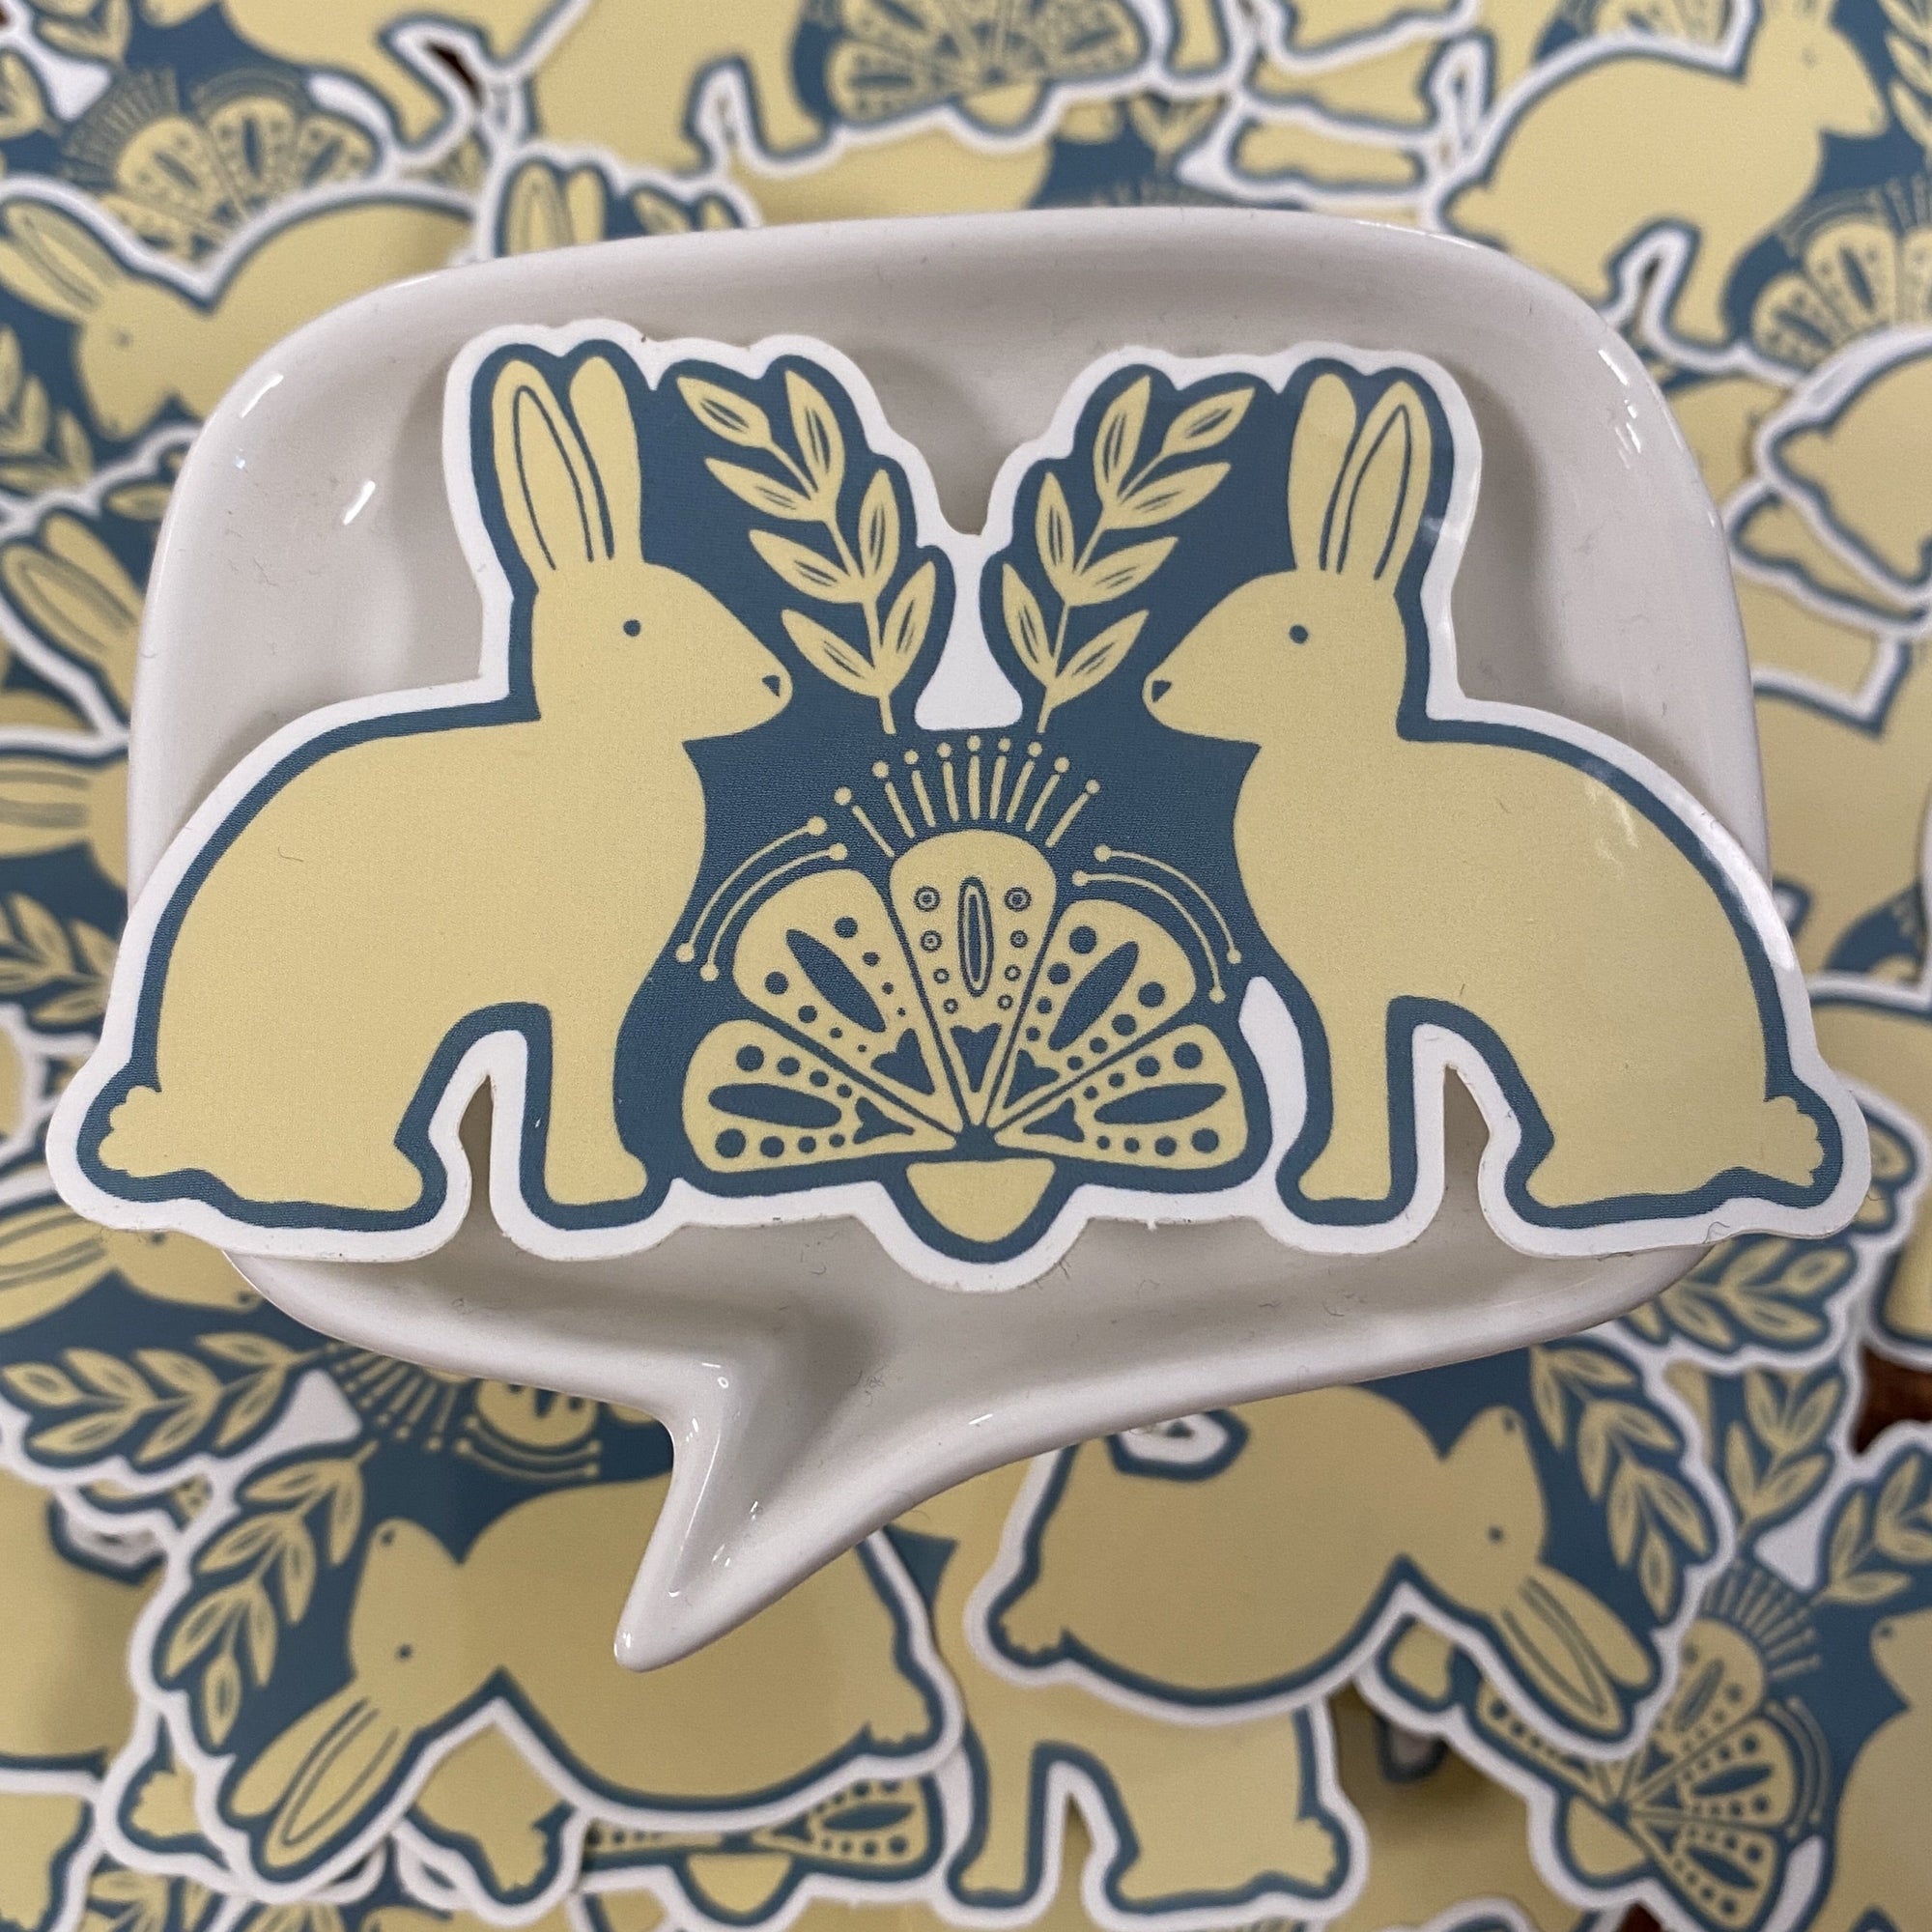 A blue and off-white die cut vinyl sticker by Ugly Baby. It is a folk art design of two rabbits facing each other. There is a folk art design between them.